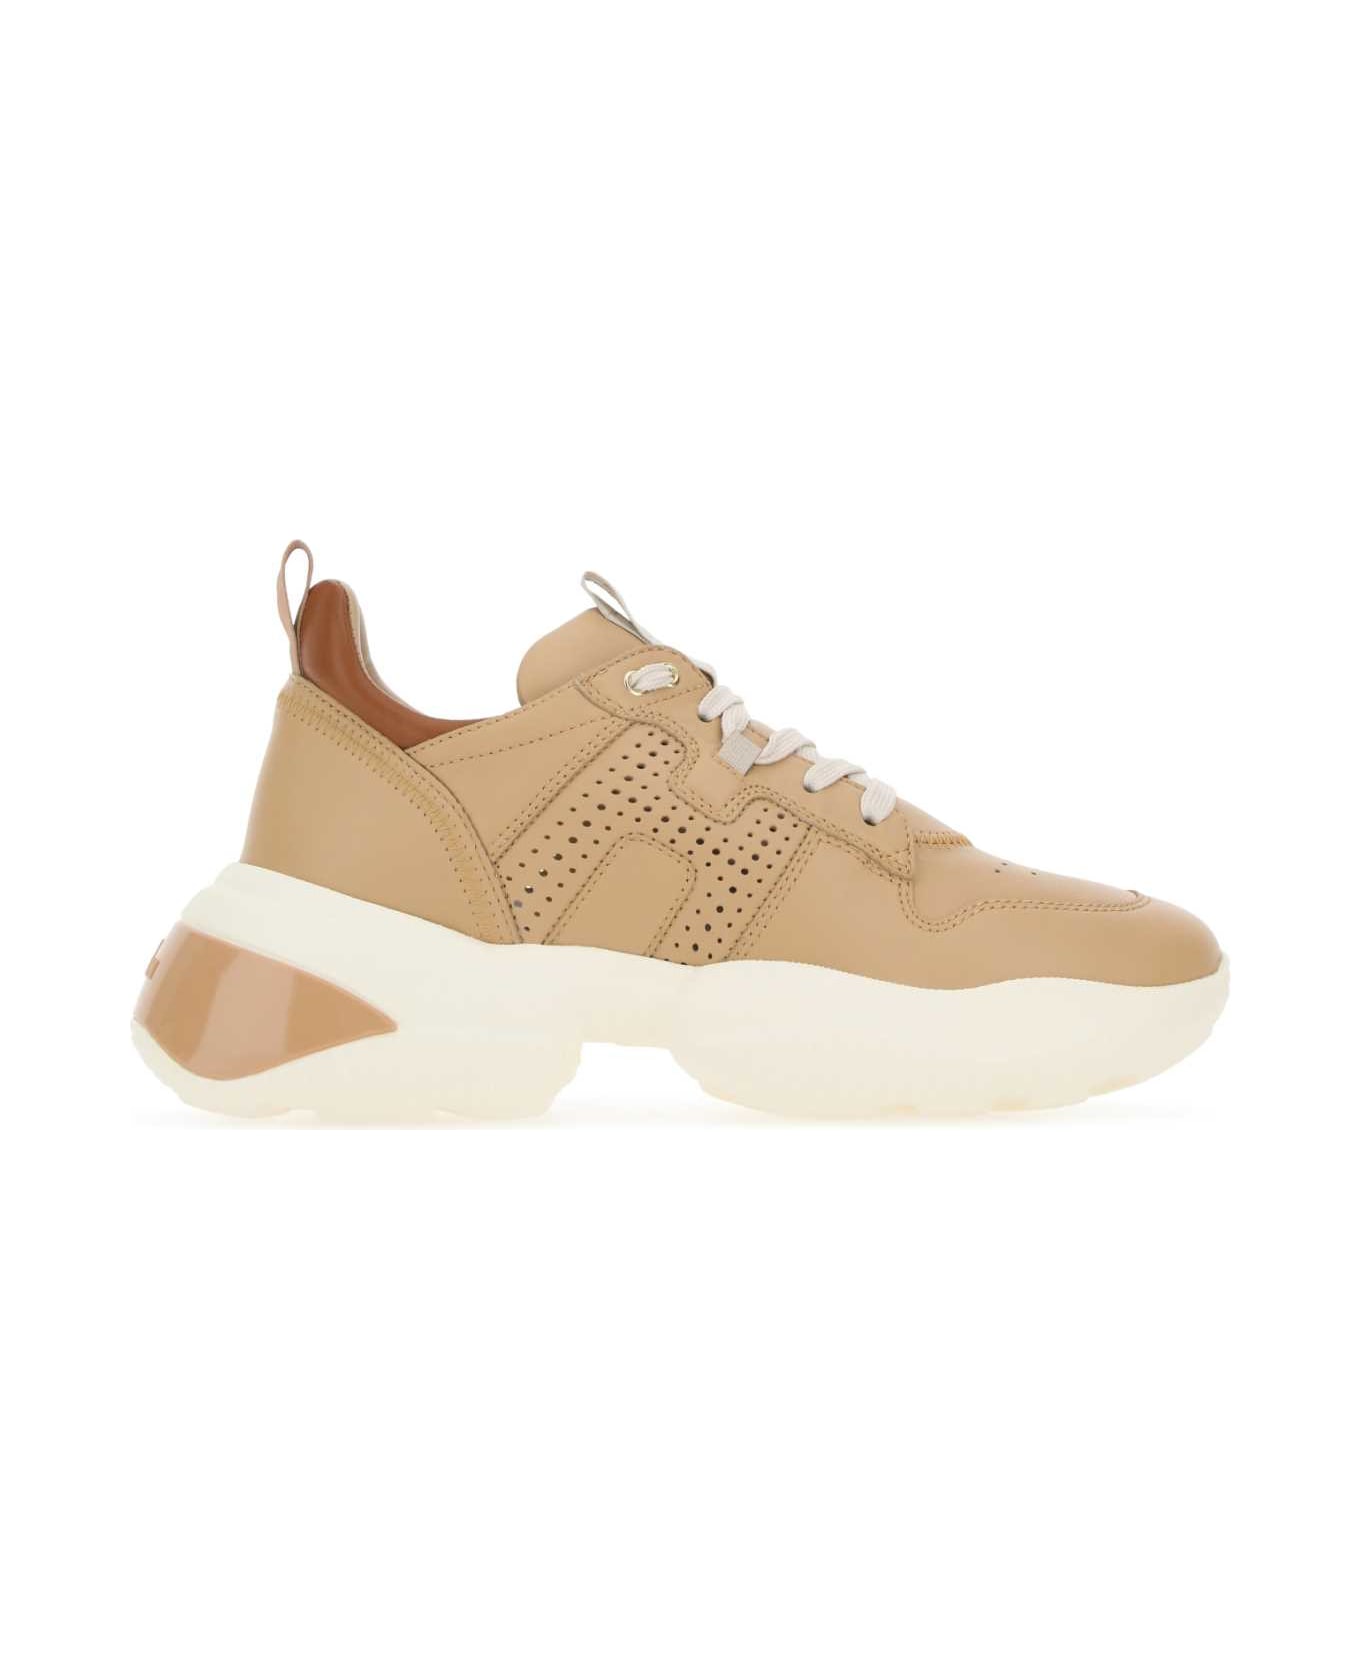 Hogan Camel Leather Interaction Sneakers - 078Z